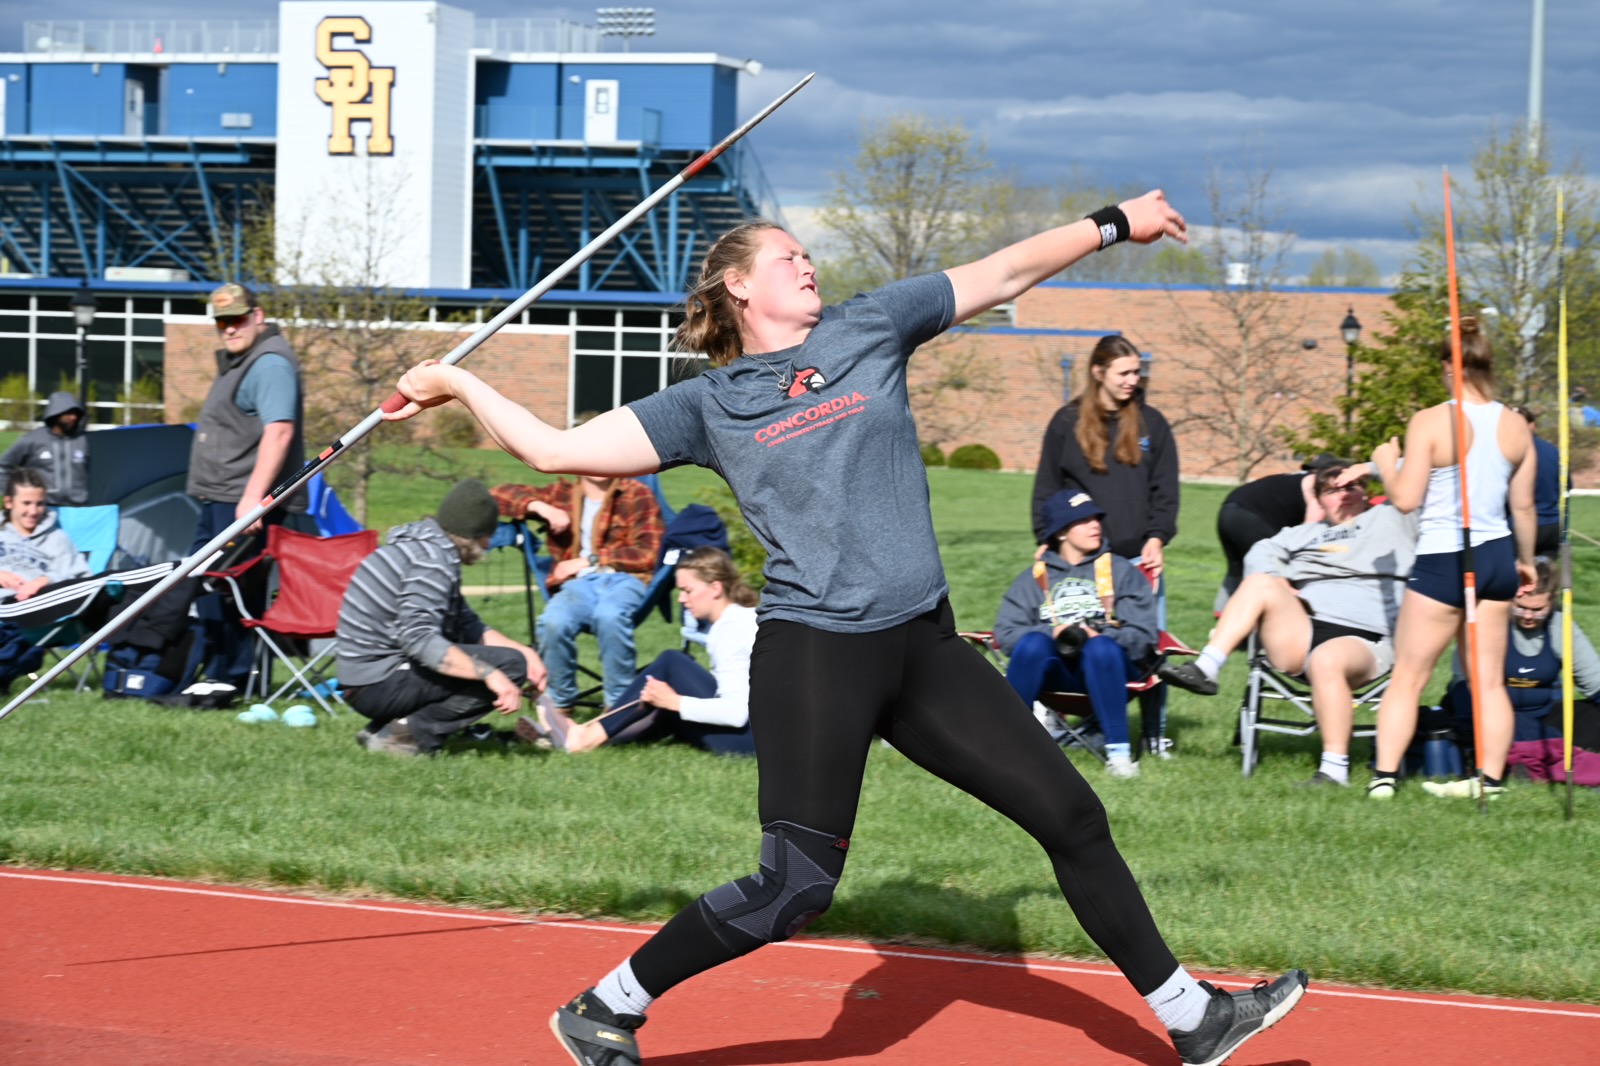 Women's Track & Field finishes the WHAC Championships in 6th place